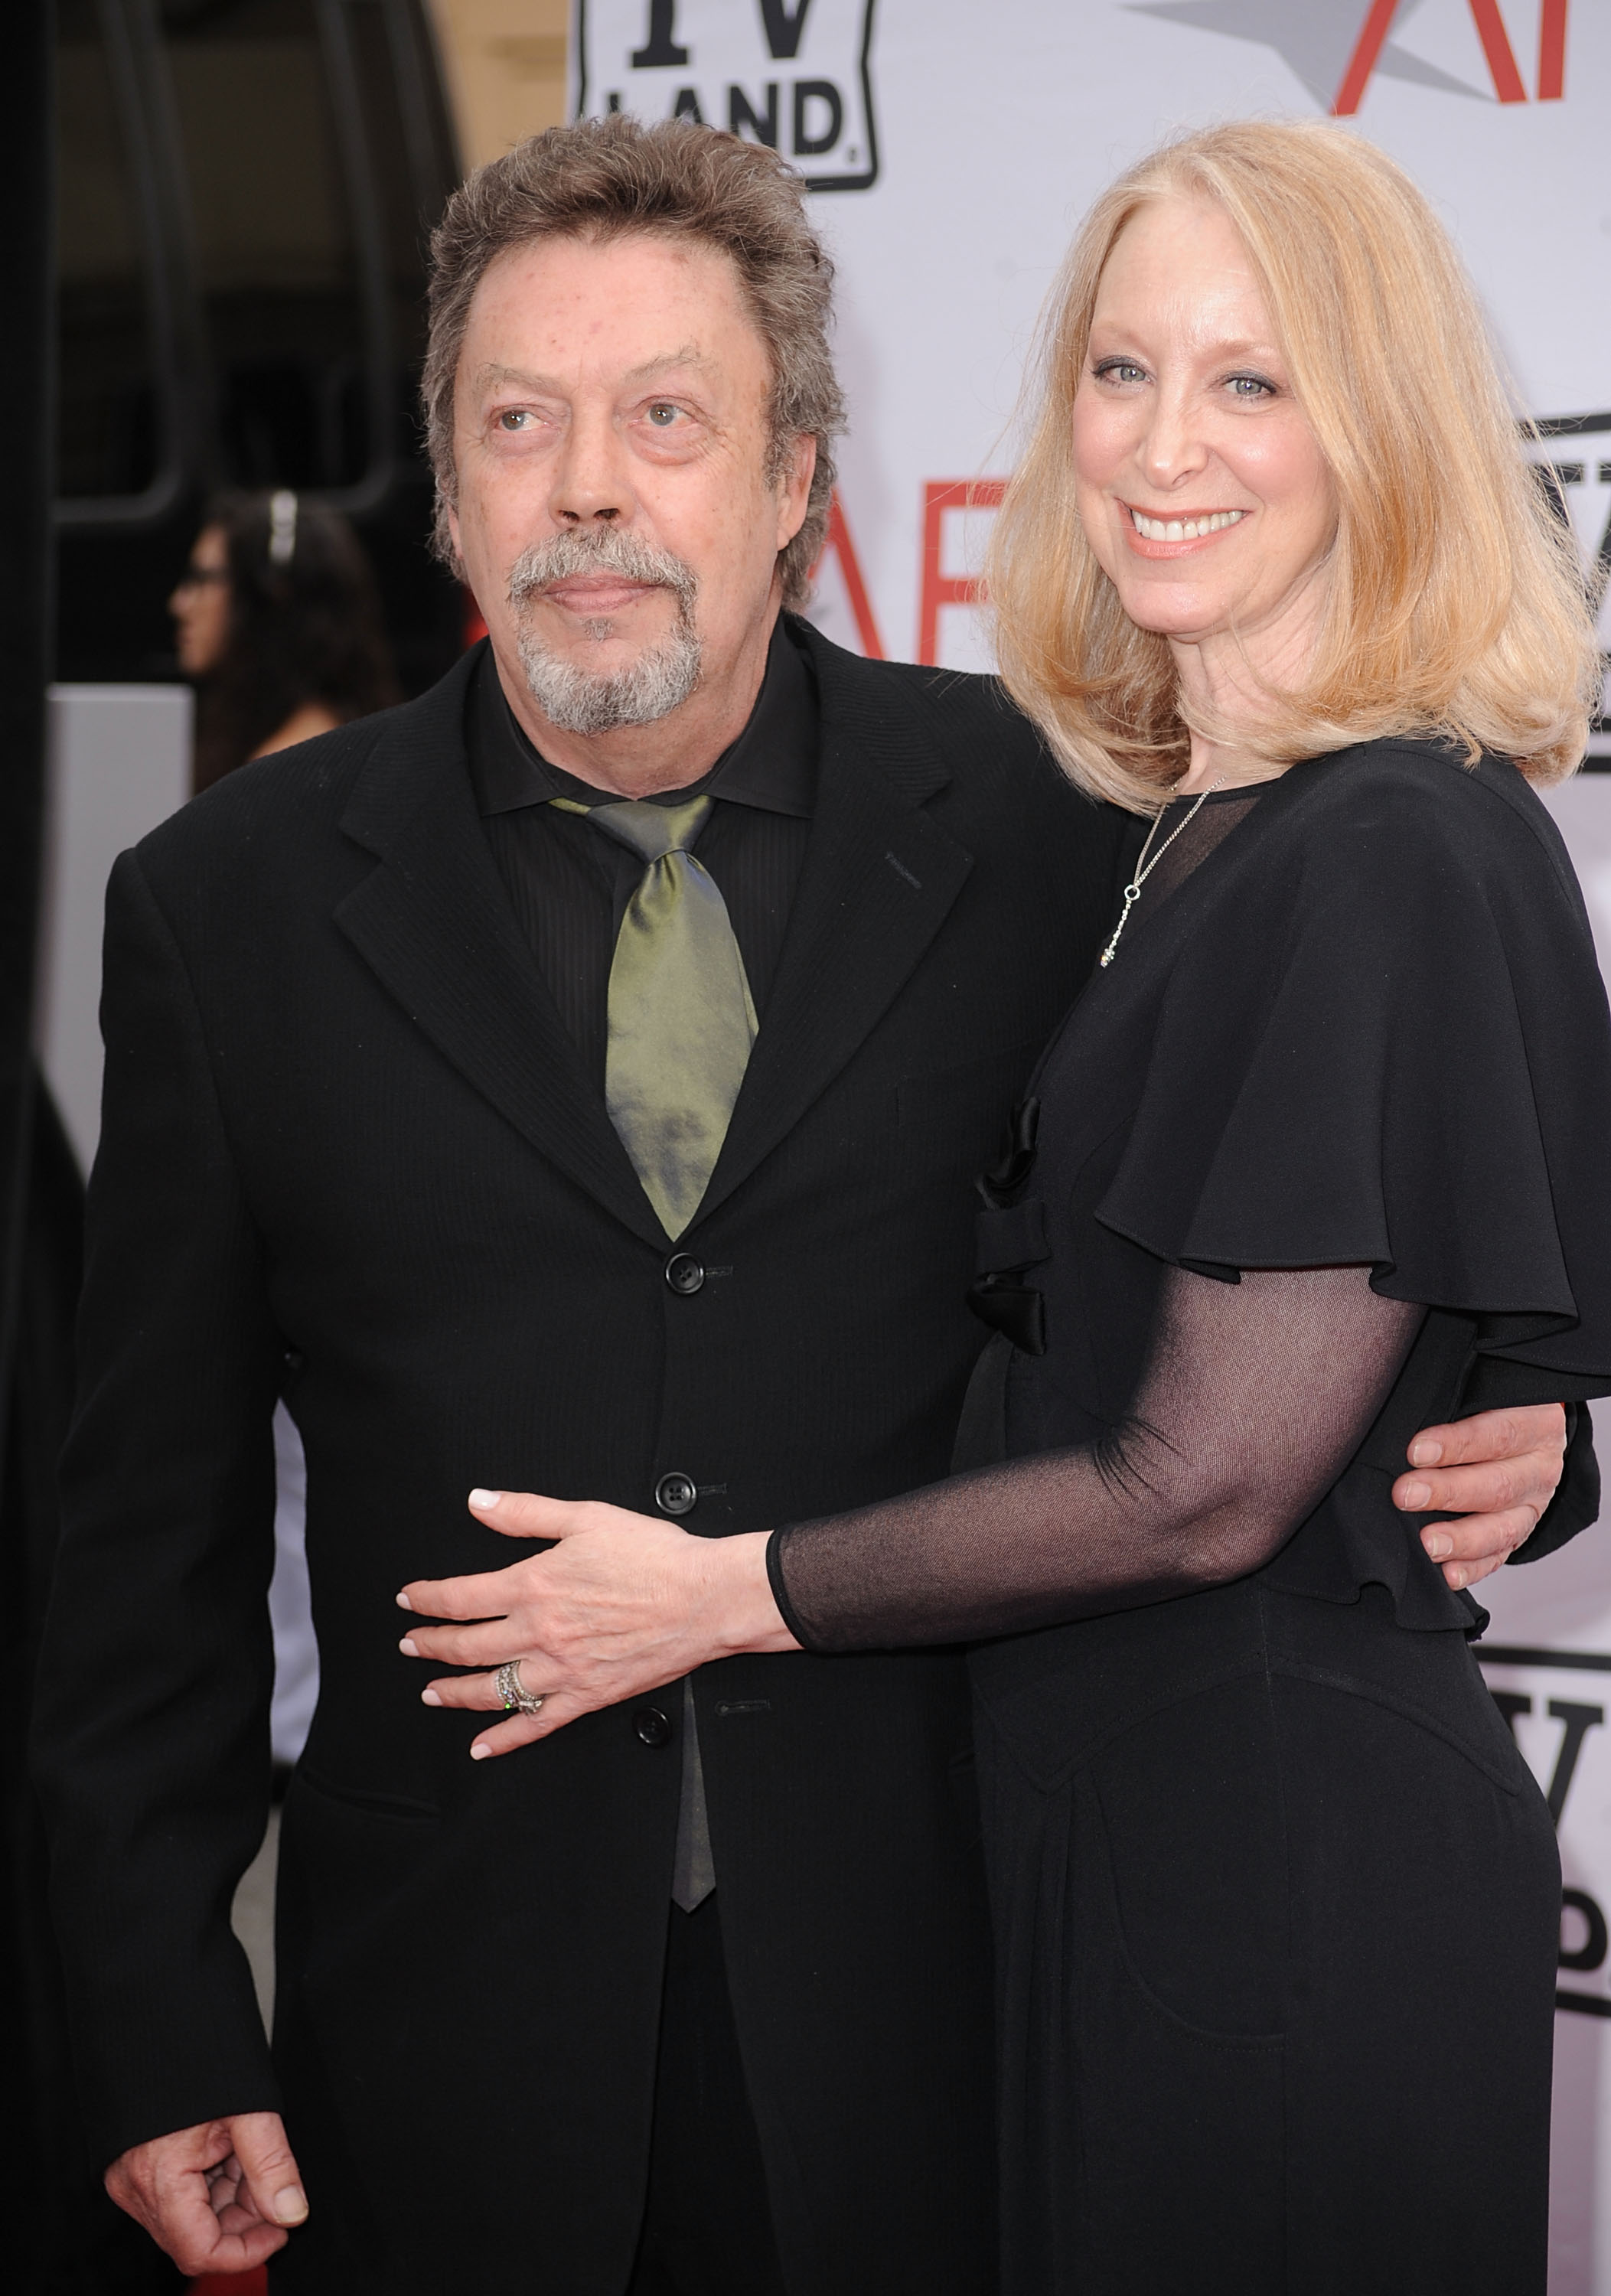 Tim Curry and Marcia Hurwitz in Los Angeles in 2010 | Source: Getty Images